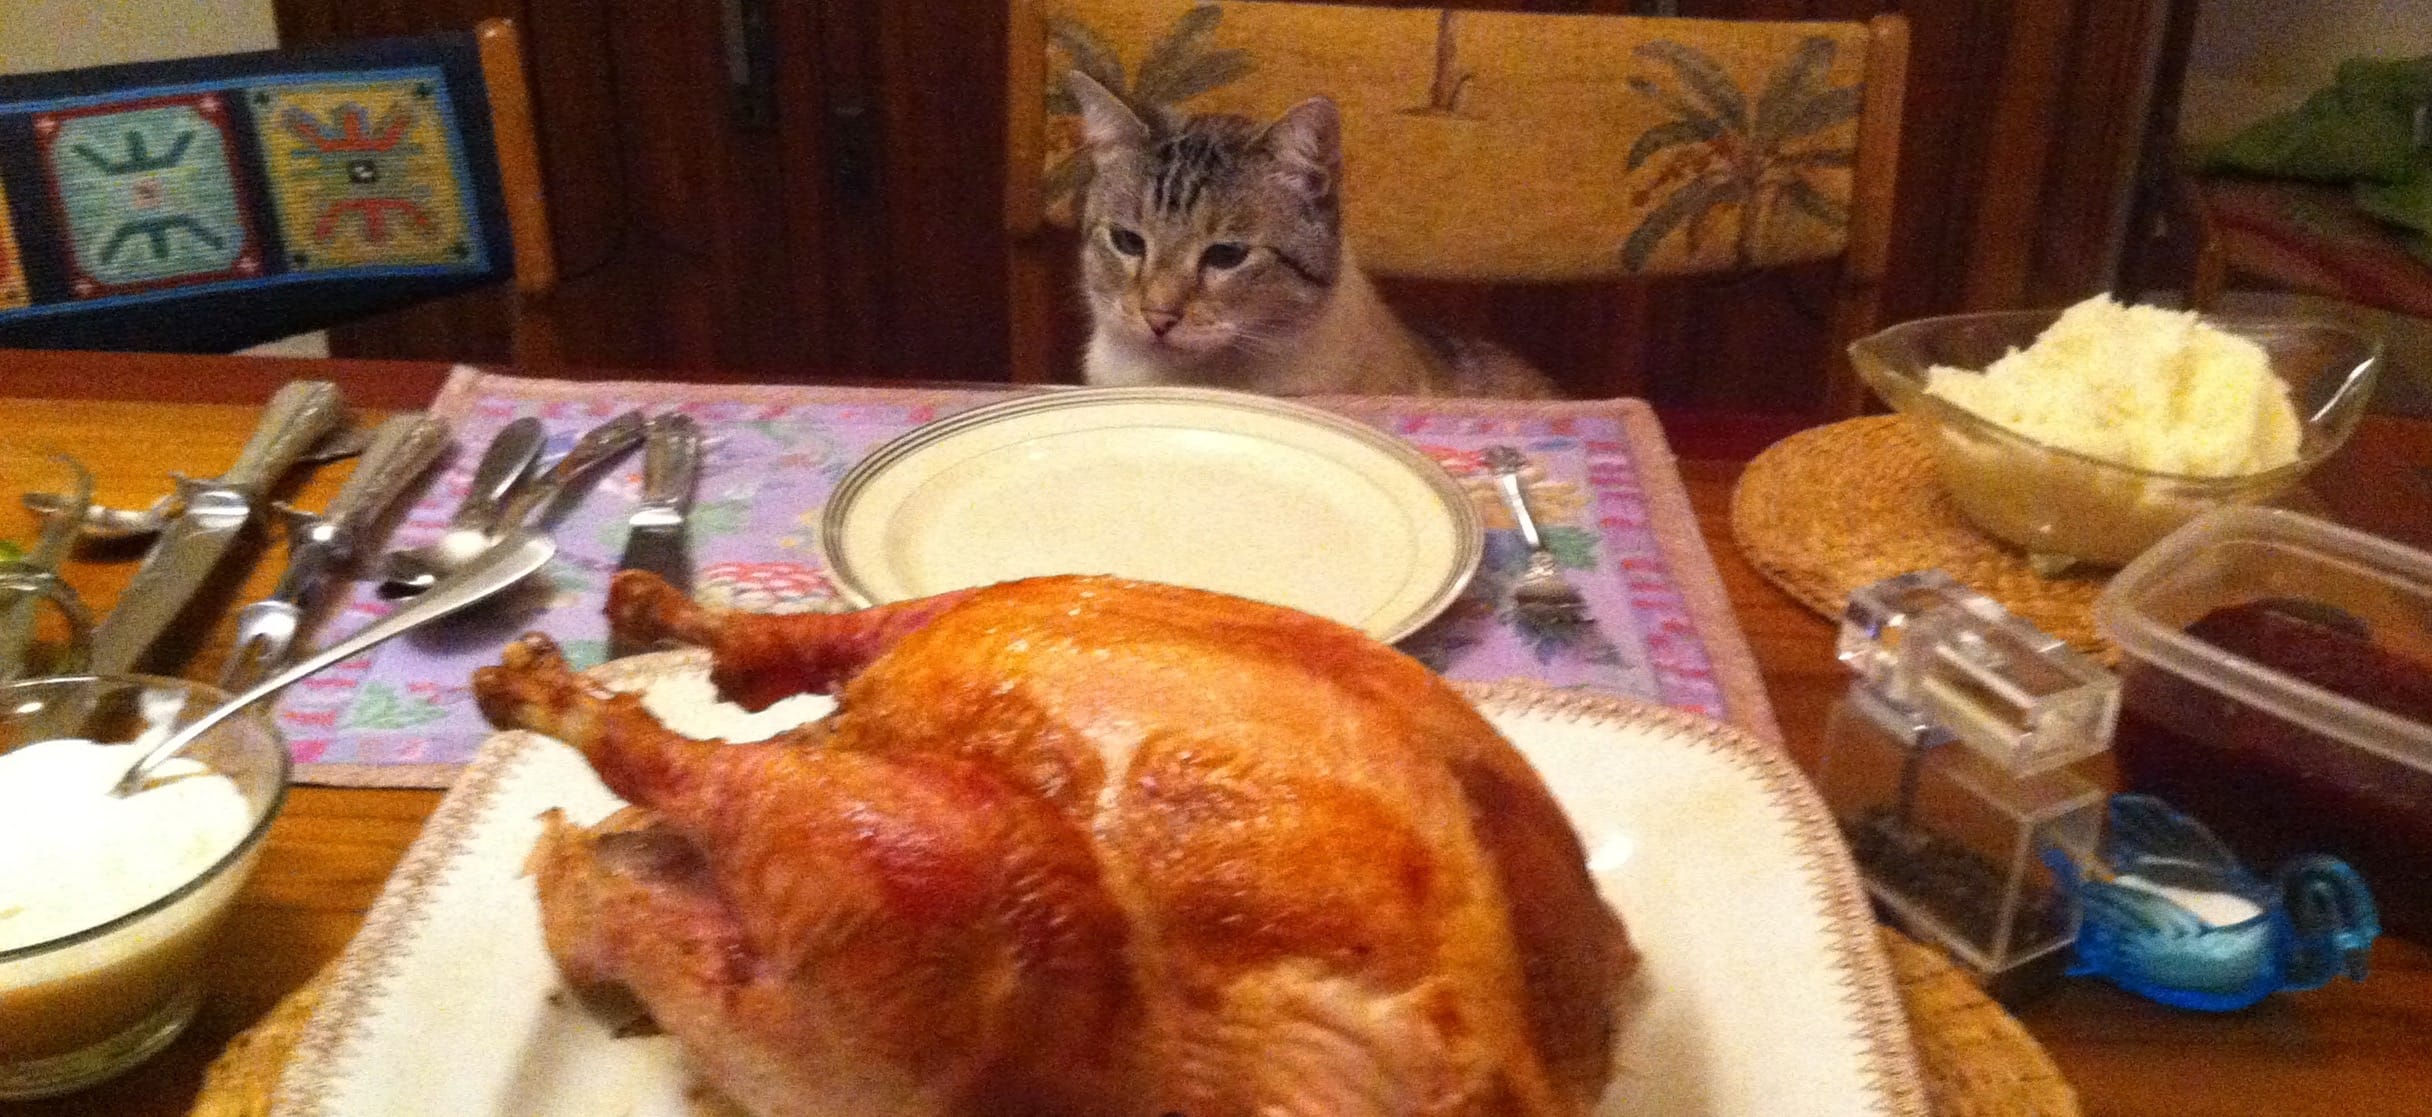 Ben, my cat, is thankful for the Thanksgiving feast.